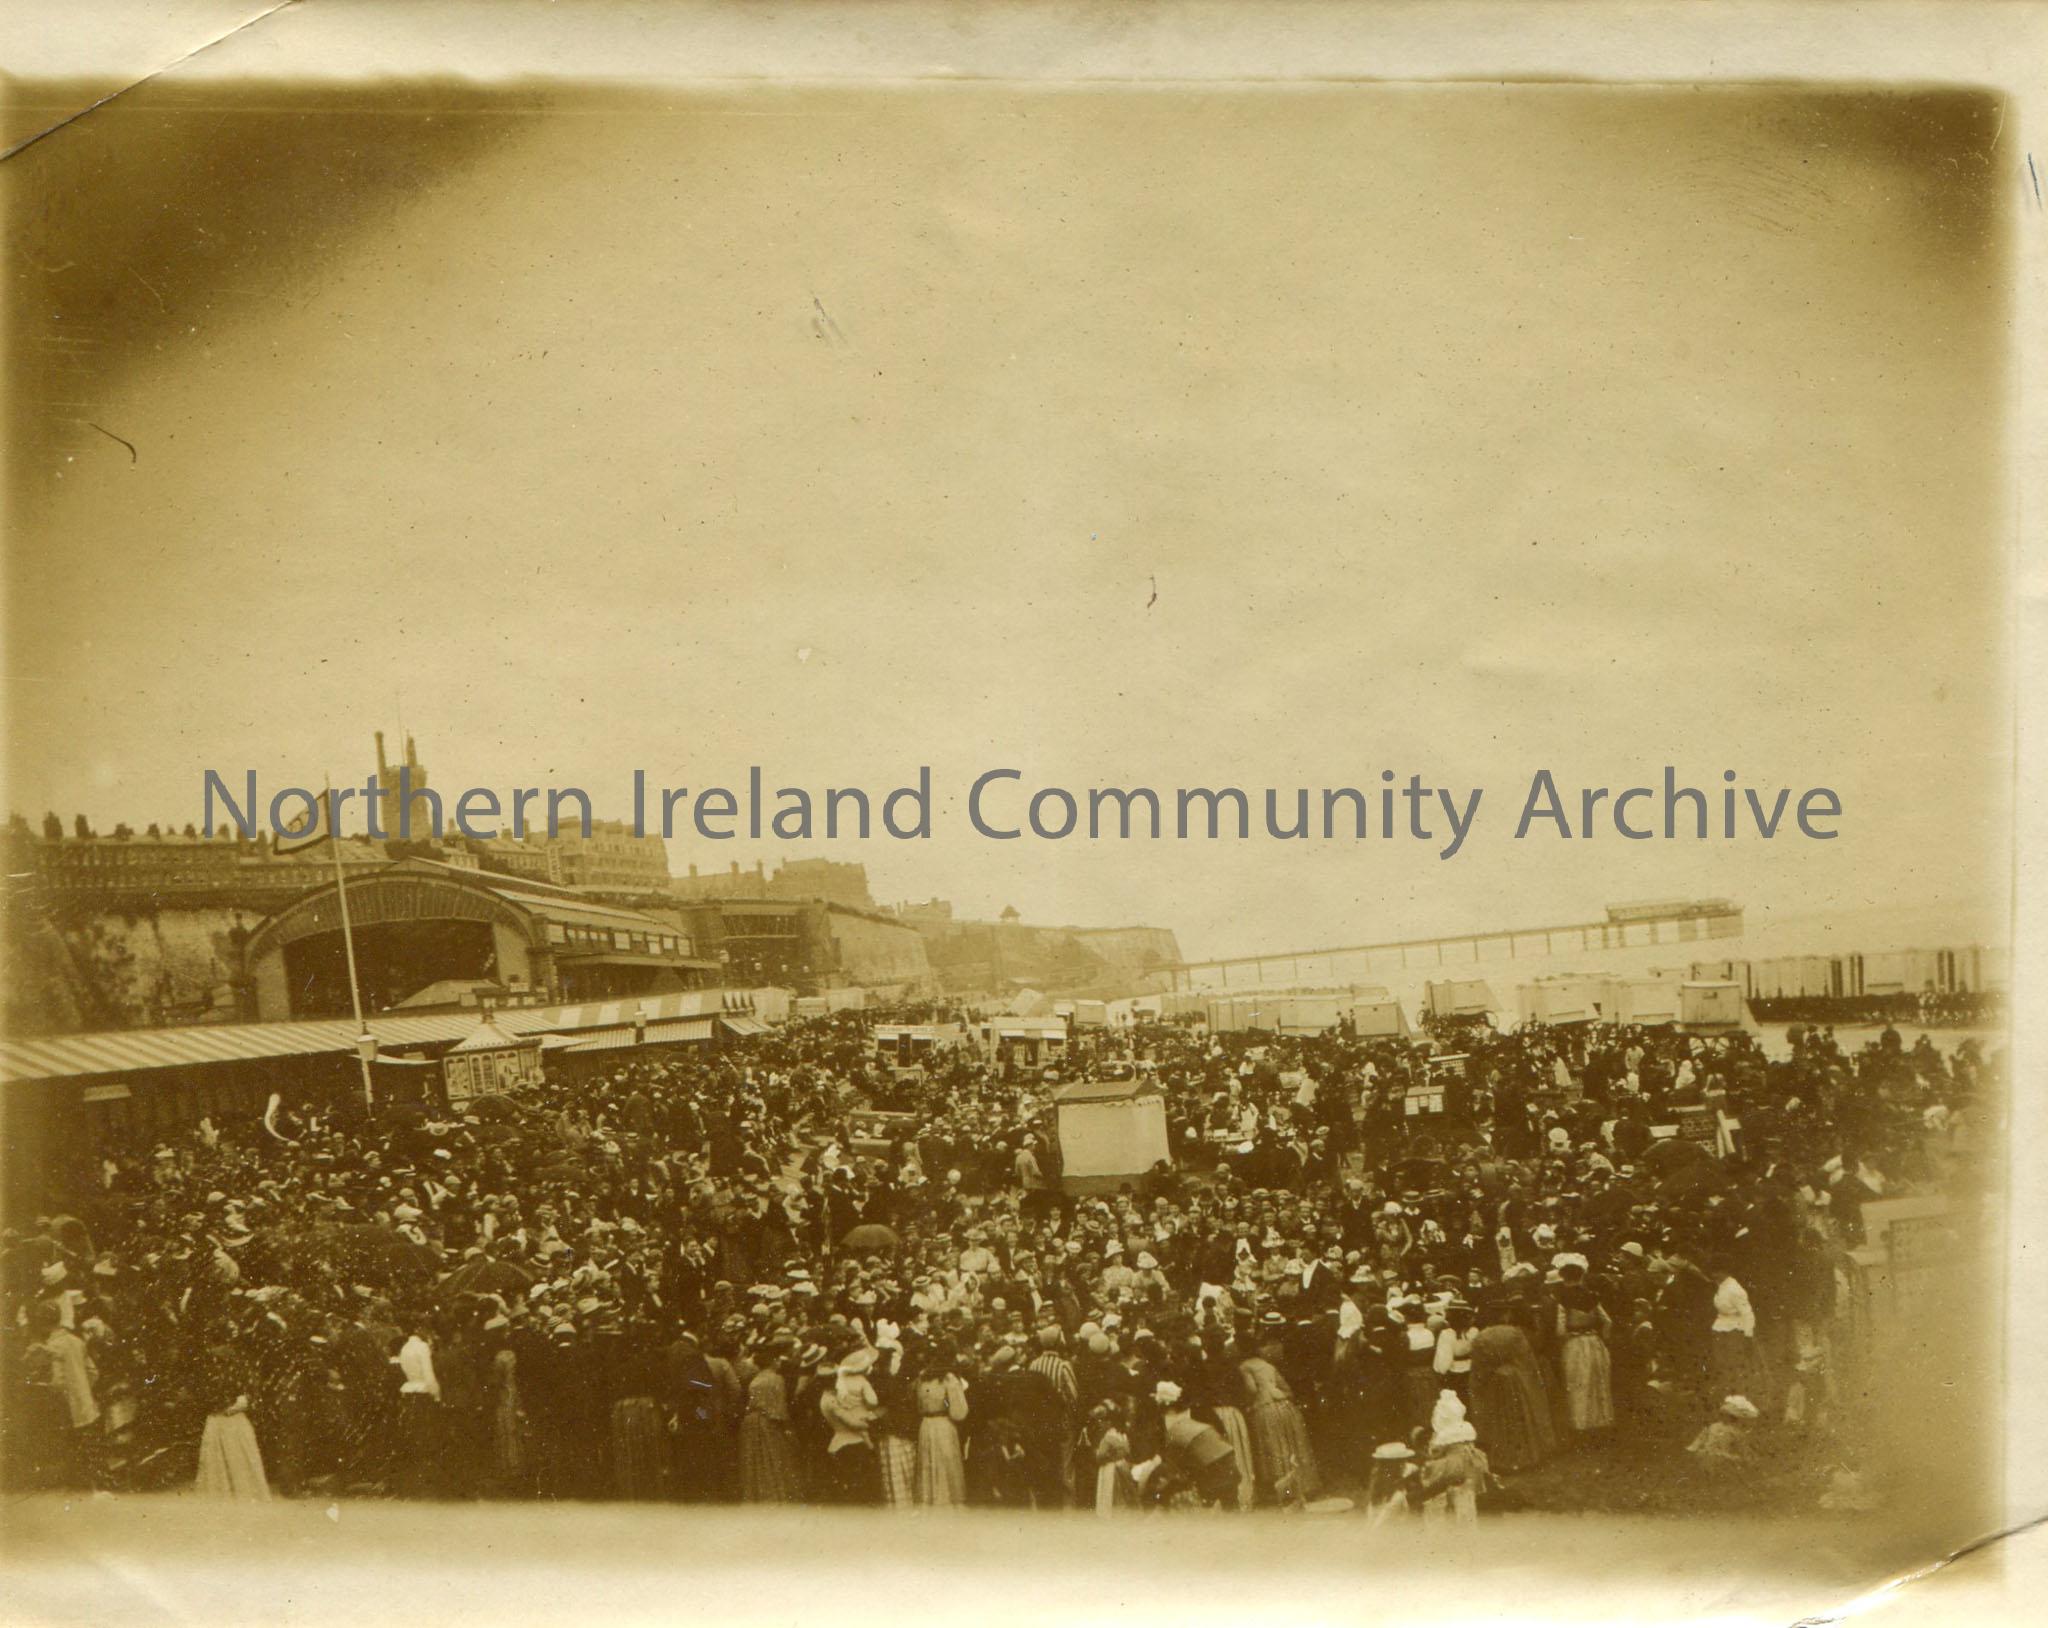 Black and white photograph of a large crowd, possibly on a beach with a pier in the background.